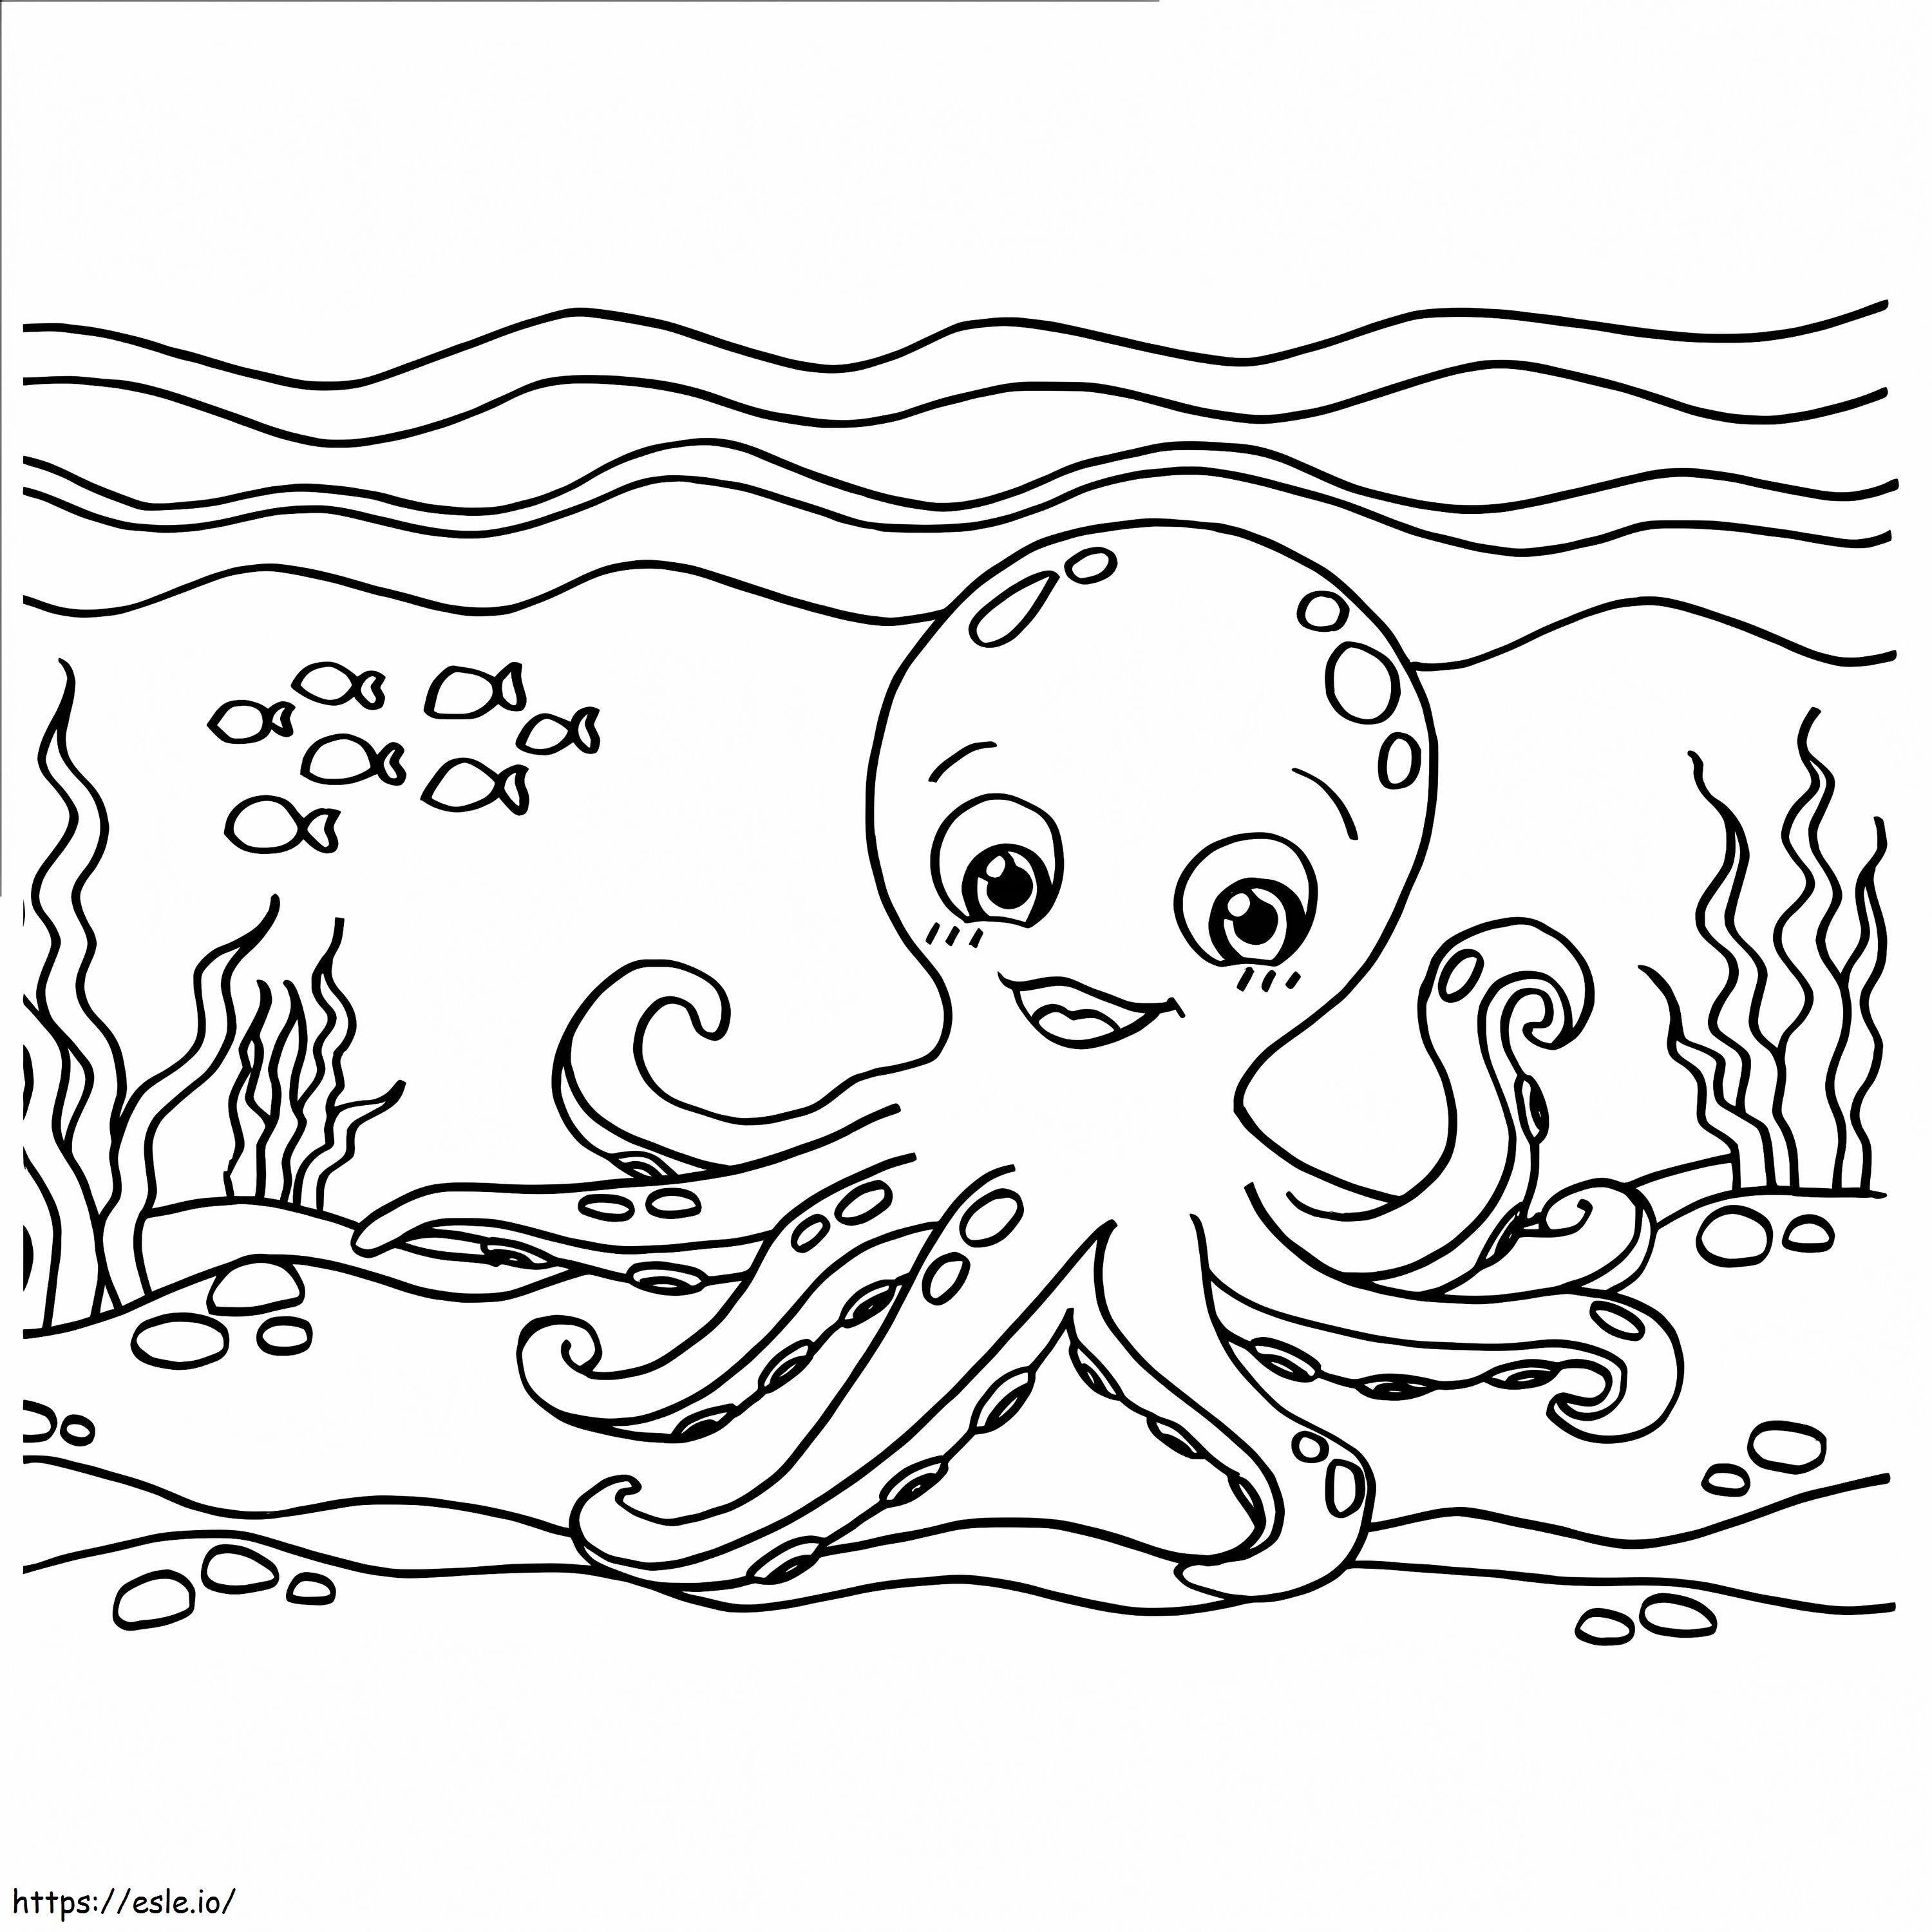 Fluffy Octopus coloring page